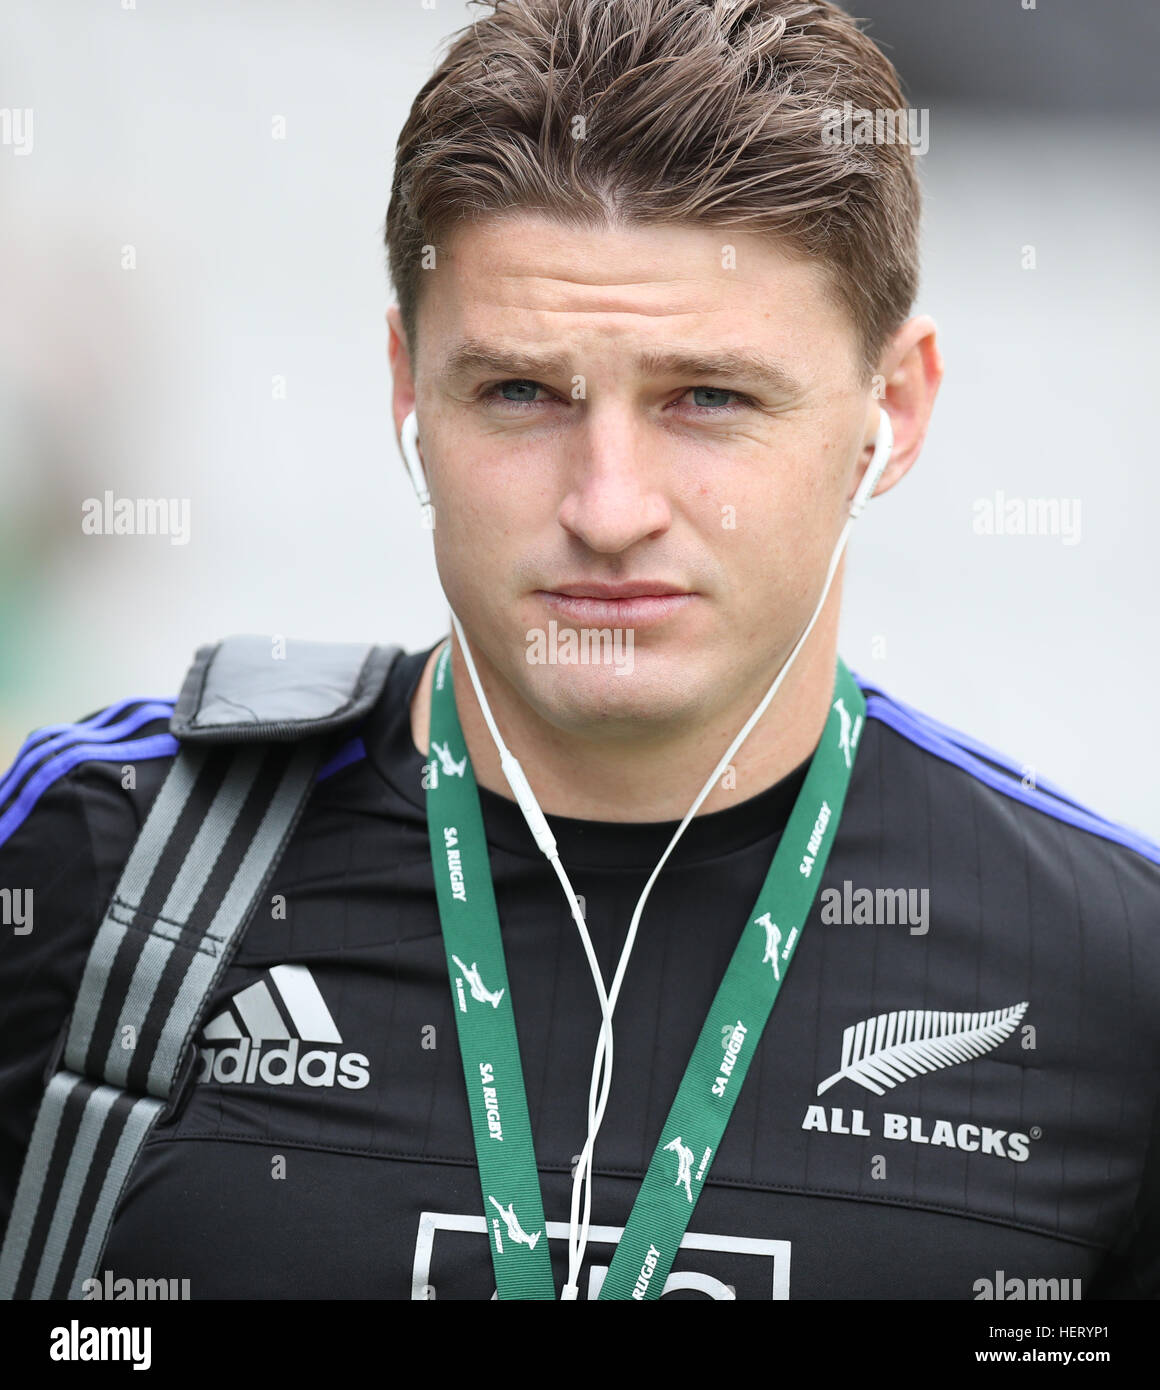 DURBAN, SOUTH AFRICA - OCTOBER 08: Beauden Barrett of New Zealand during the The Rugby Championship match between South Africa and New Zealand at Grow Stock Photo